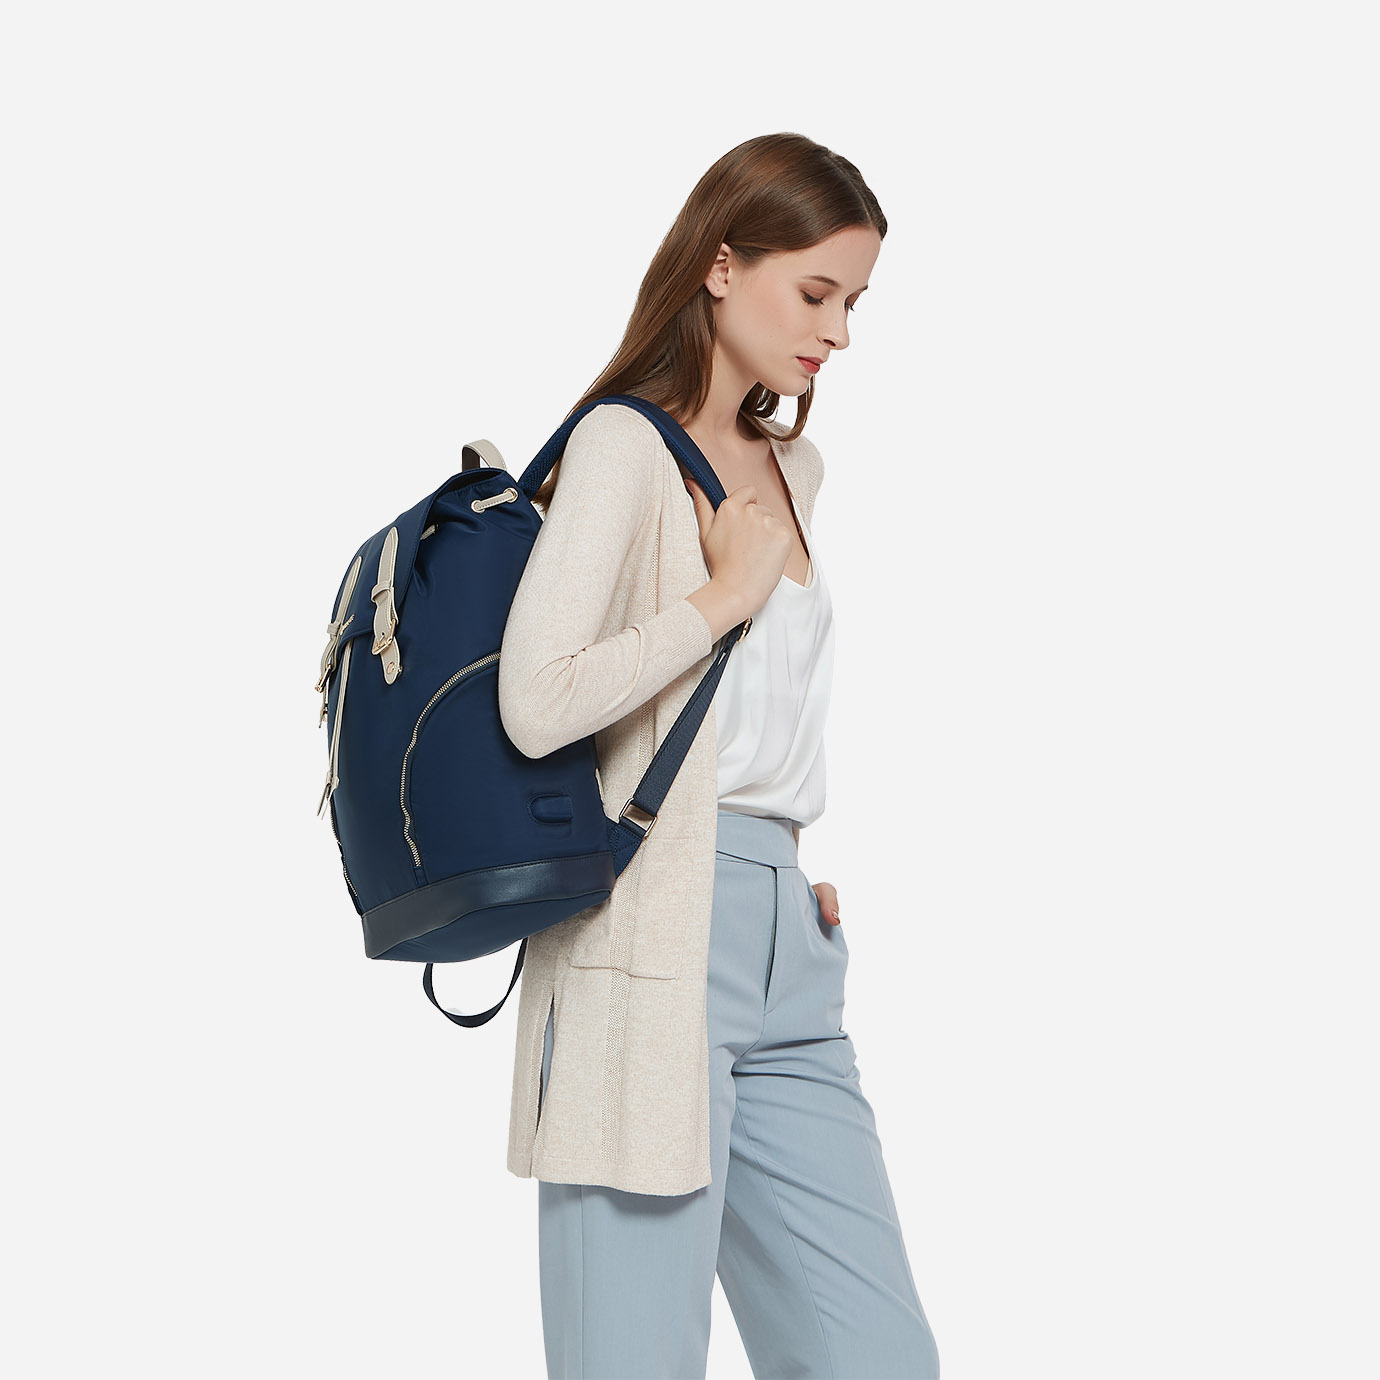 Nordace - Women's Backpacks: What Makes Them Different?